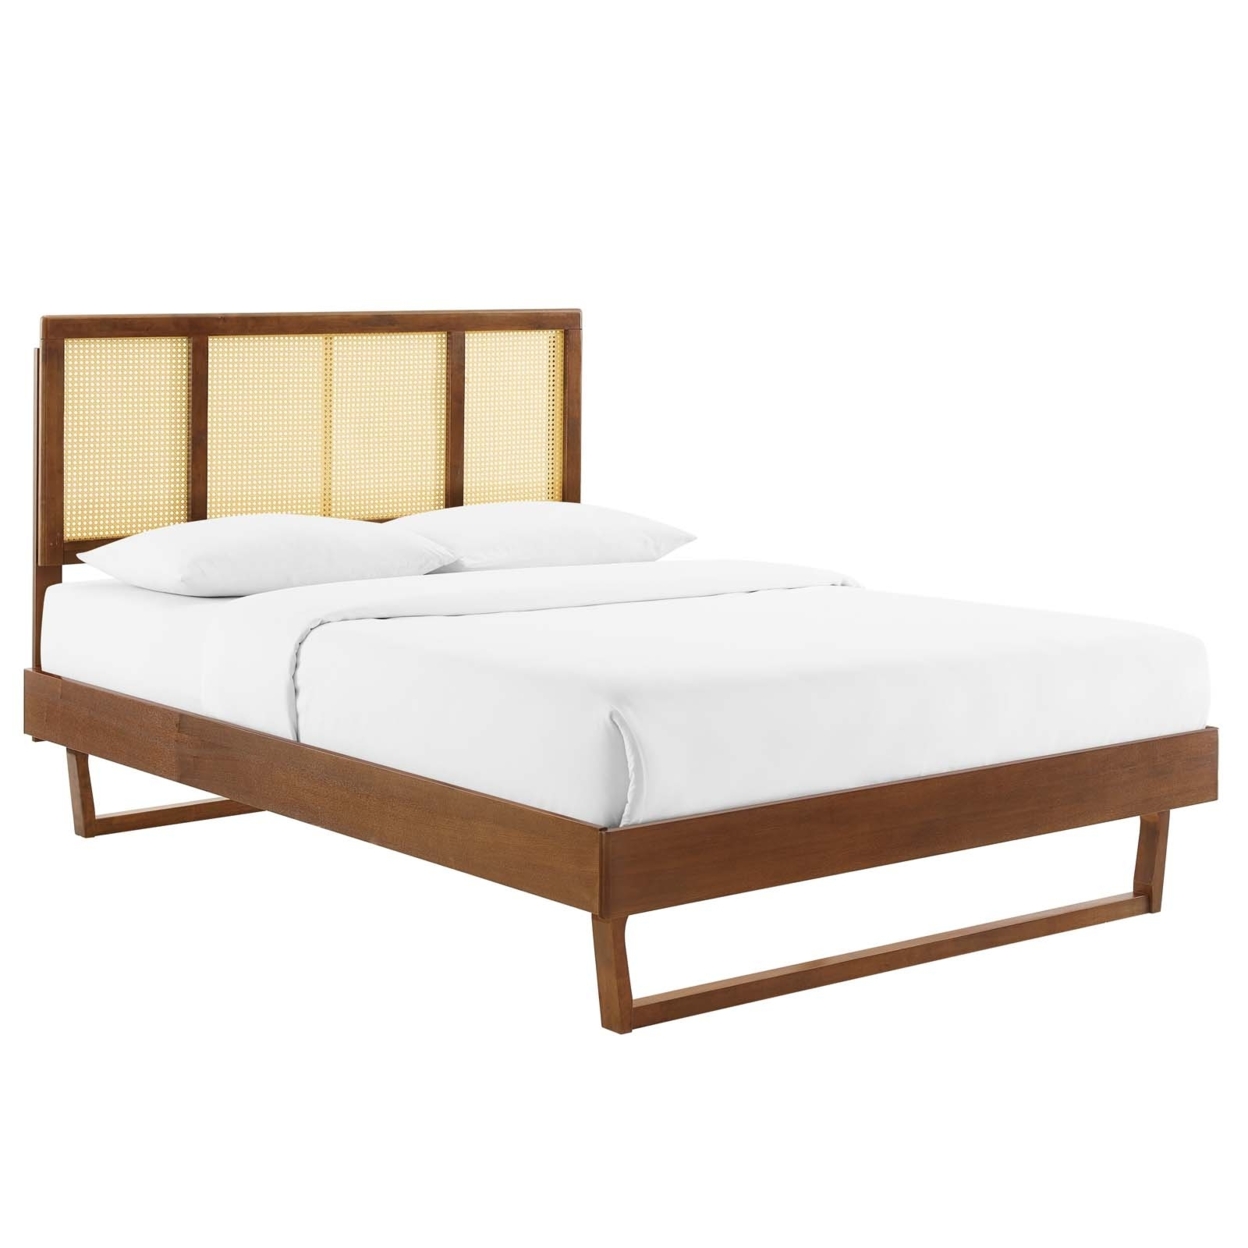 Kelsea Cane And Wood King Platform Bed With Angular Legs, Walnut